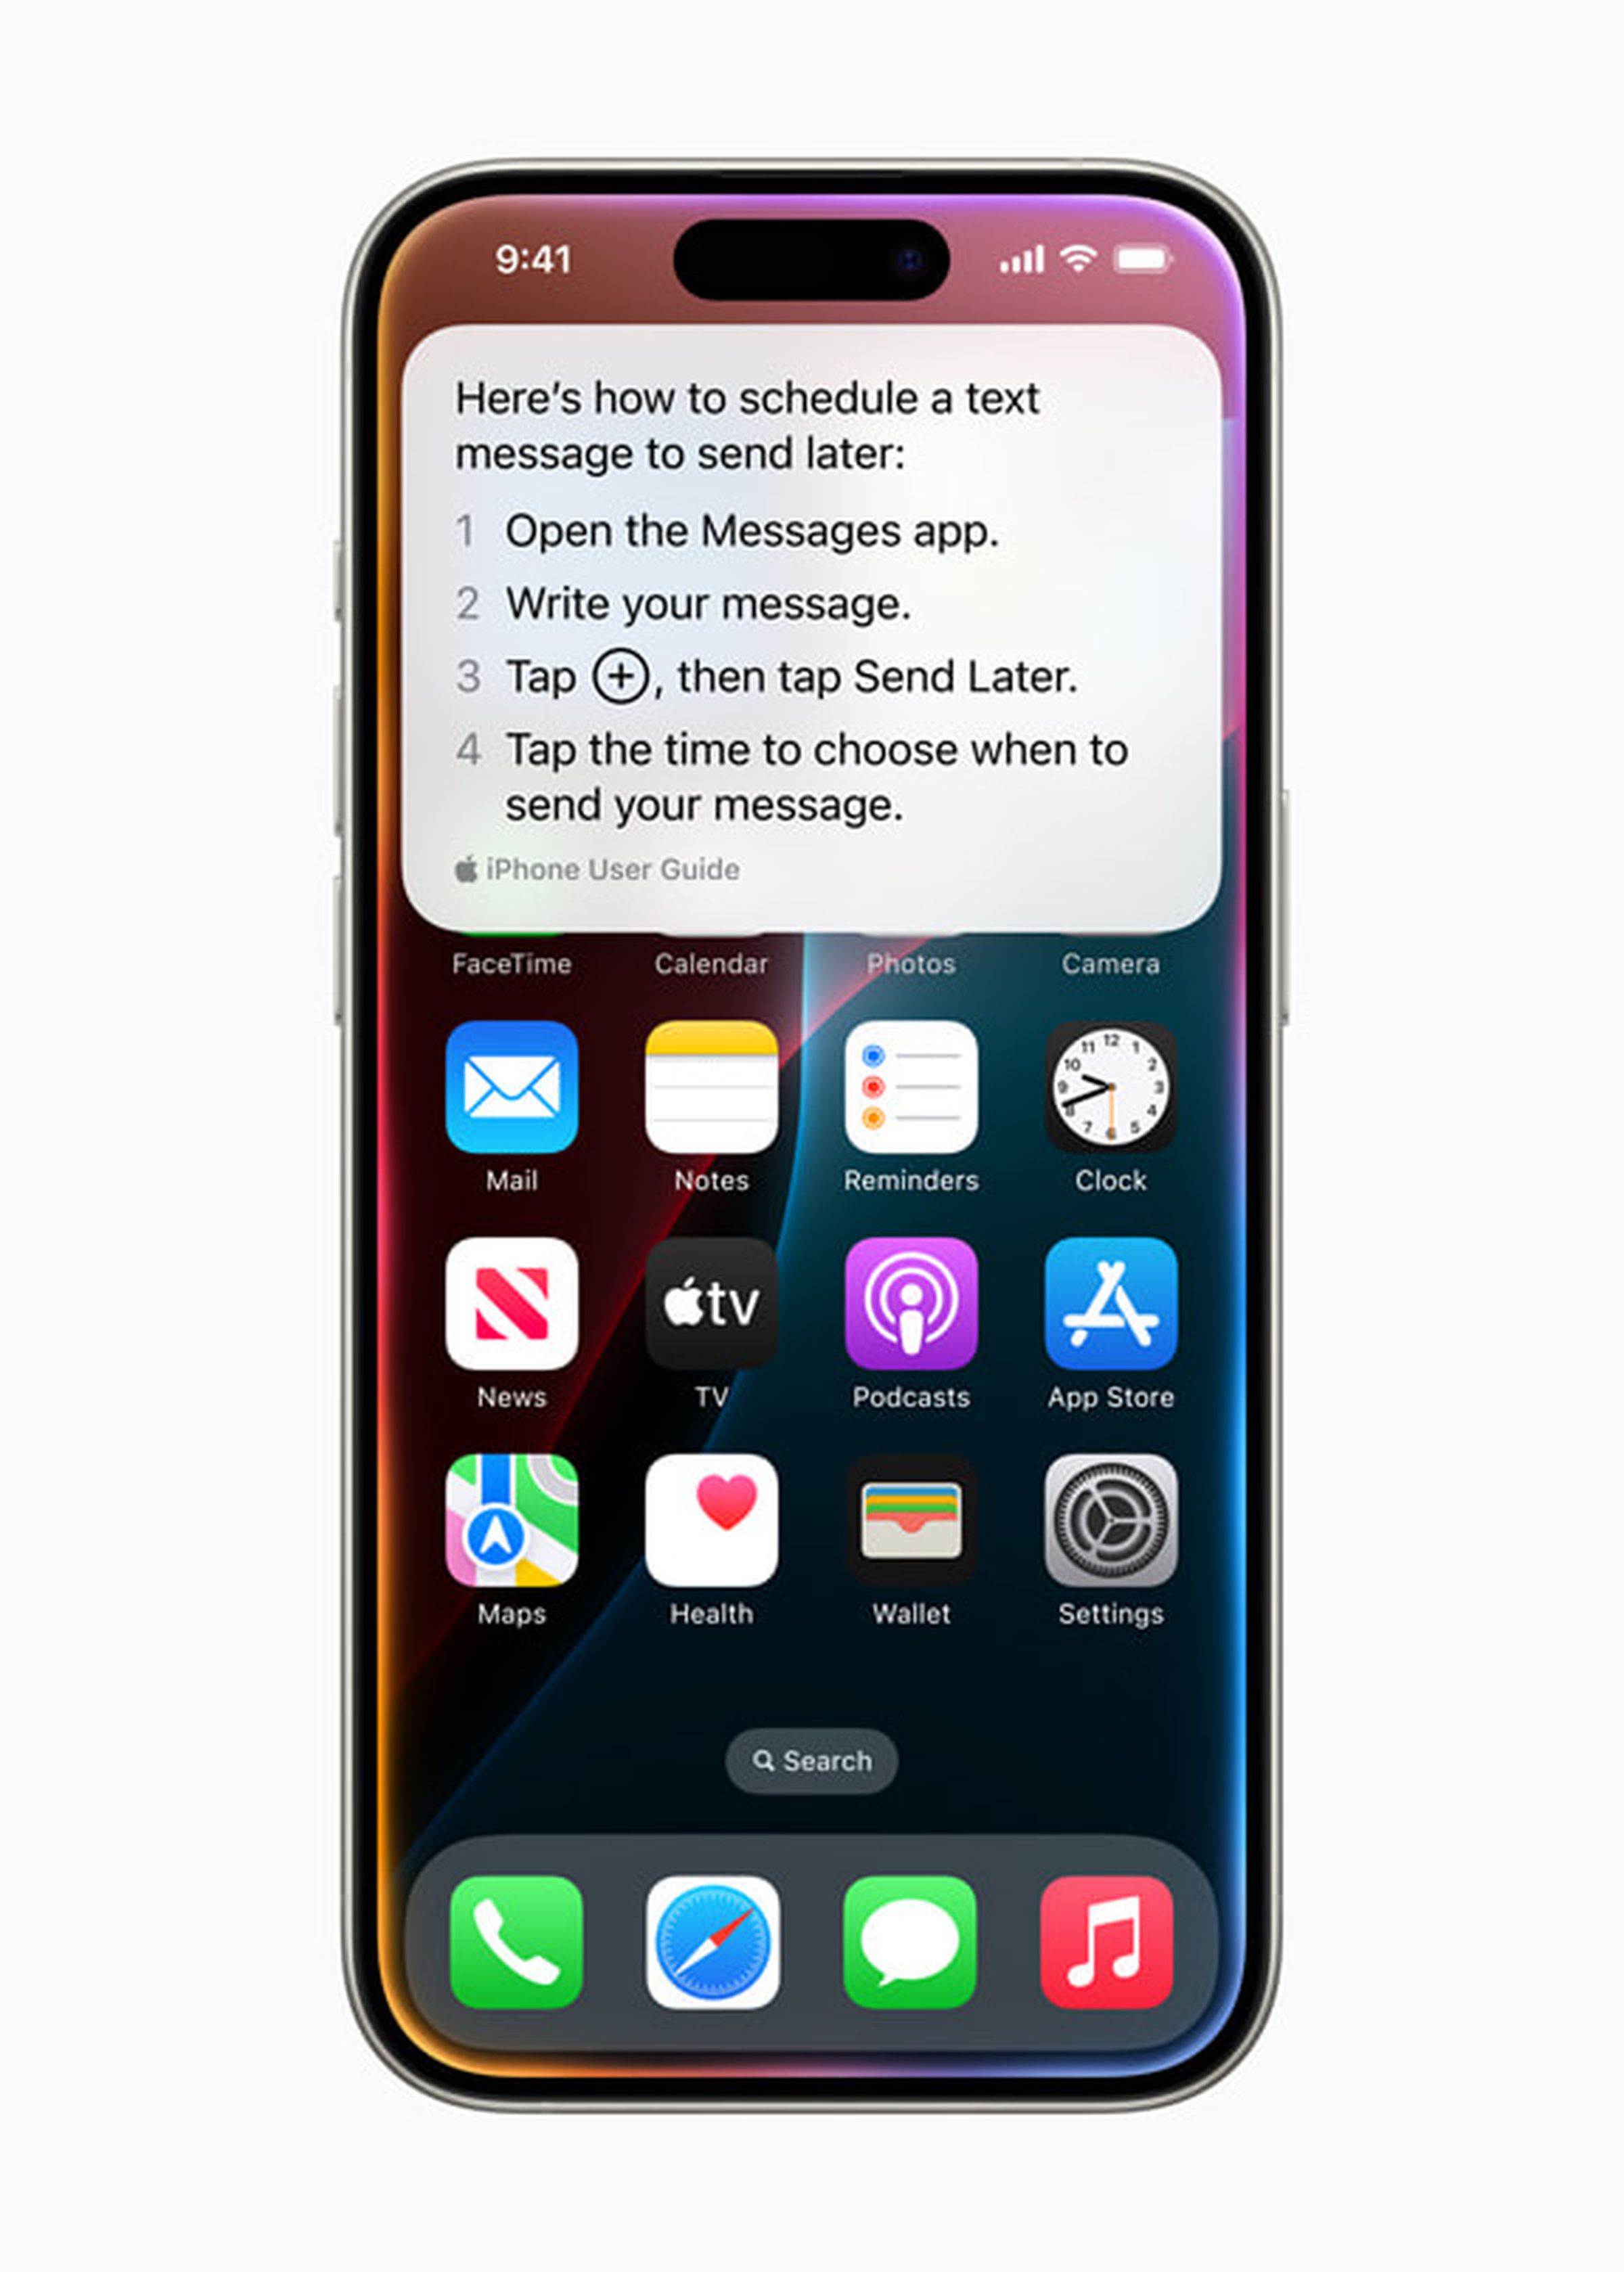 A screenshot showing instructions at the top of an iPhone for how to schedule a text to send later.